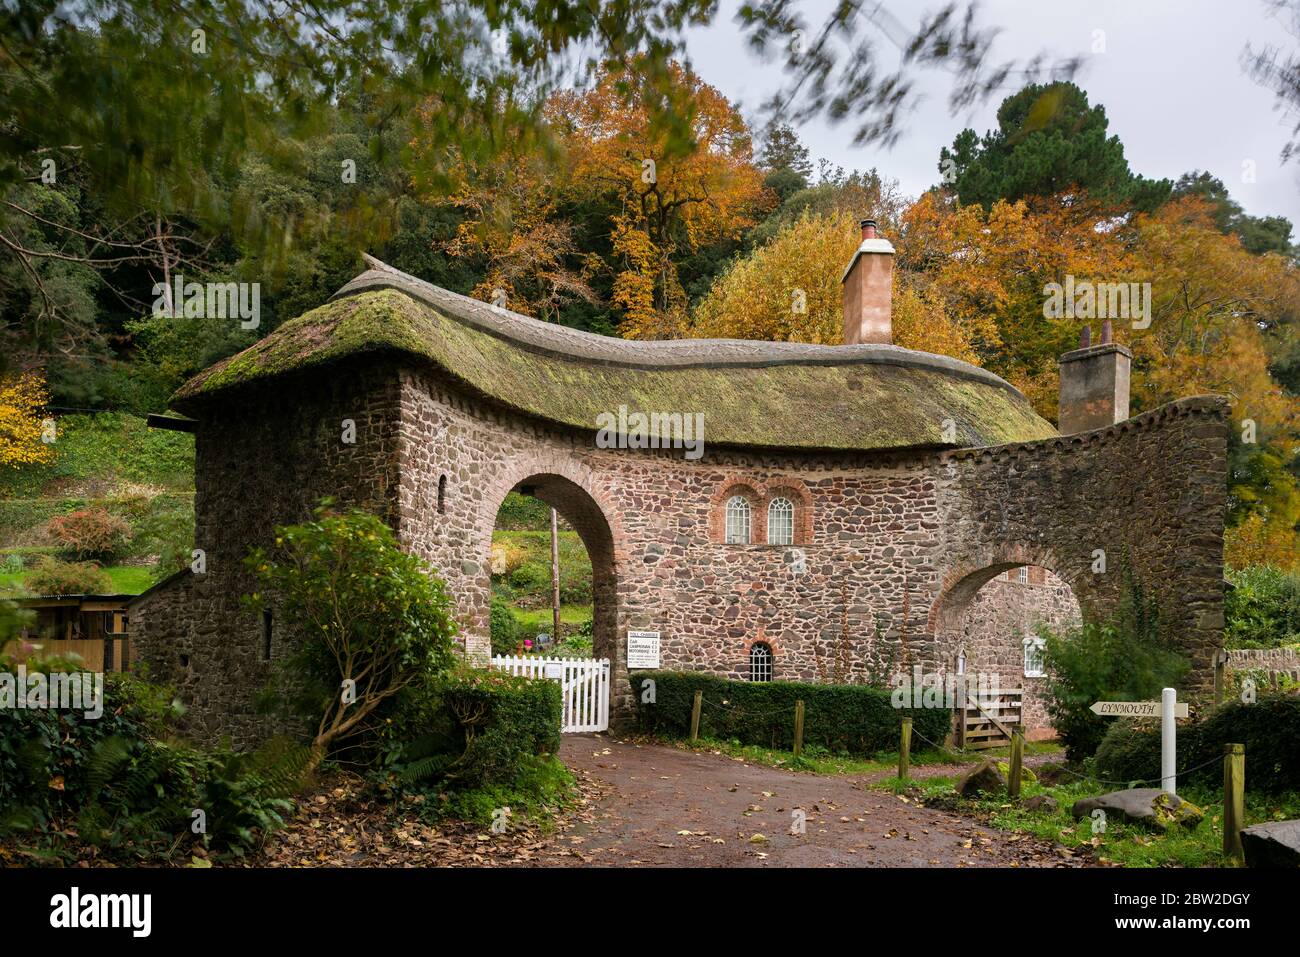 Worthy Toll House at the entrance to Worthy Toll Road near Porlock in the Exmoor National Park, Somerset, England. Stock Photo